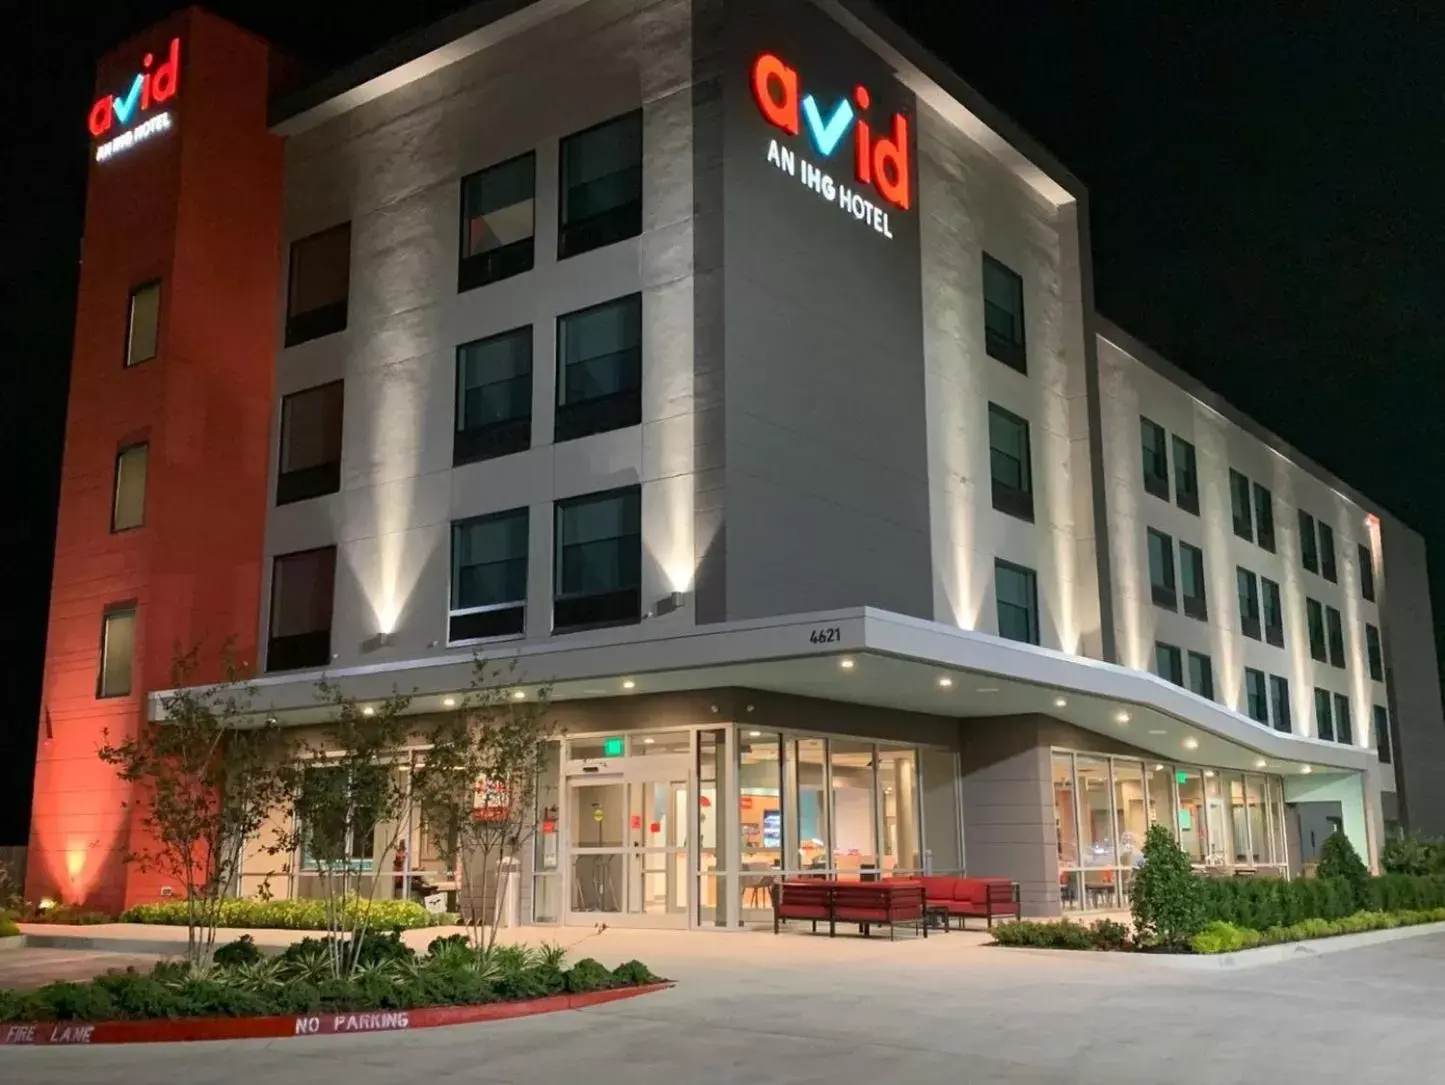 Property building in Avid hotels - Oklahoma City Airport, an IHG Hotel